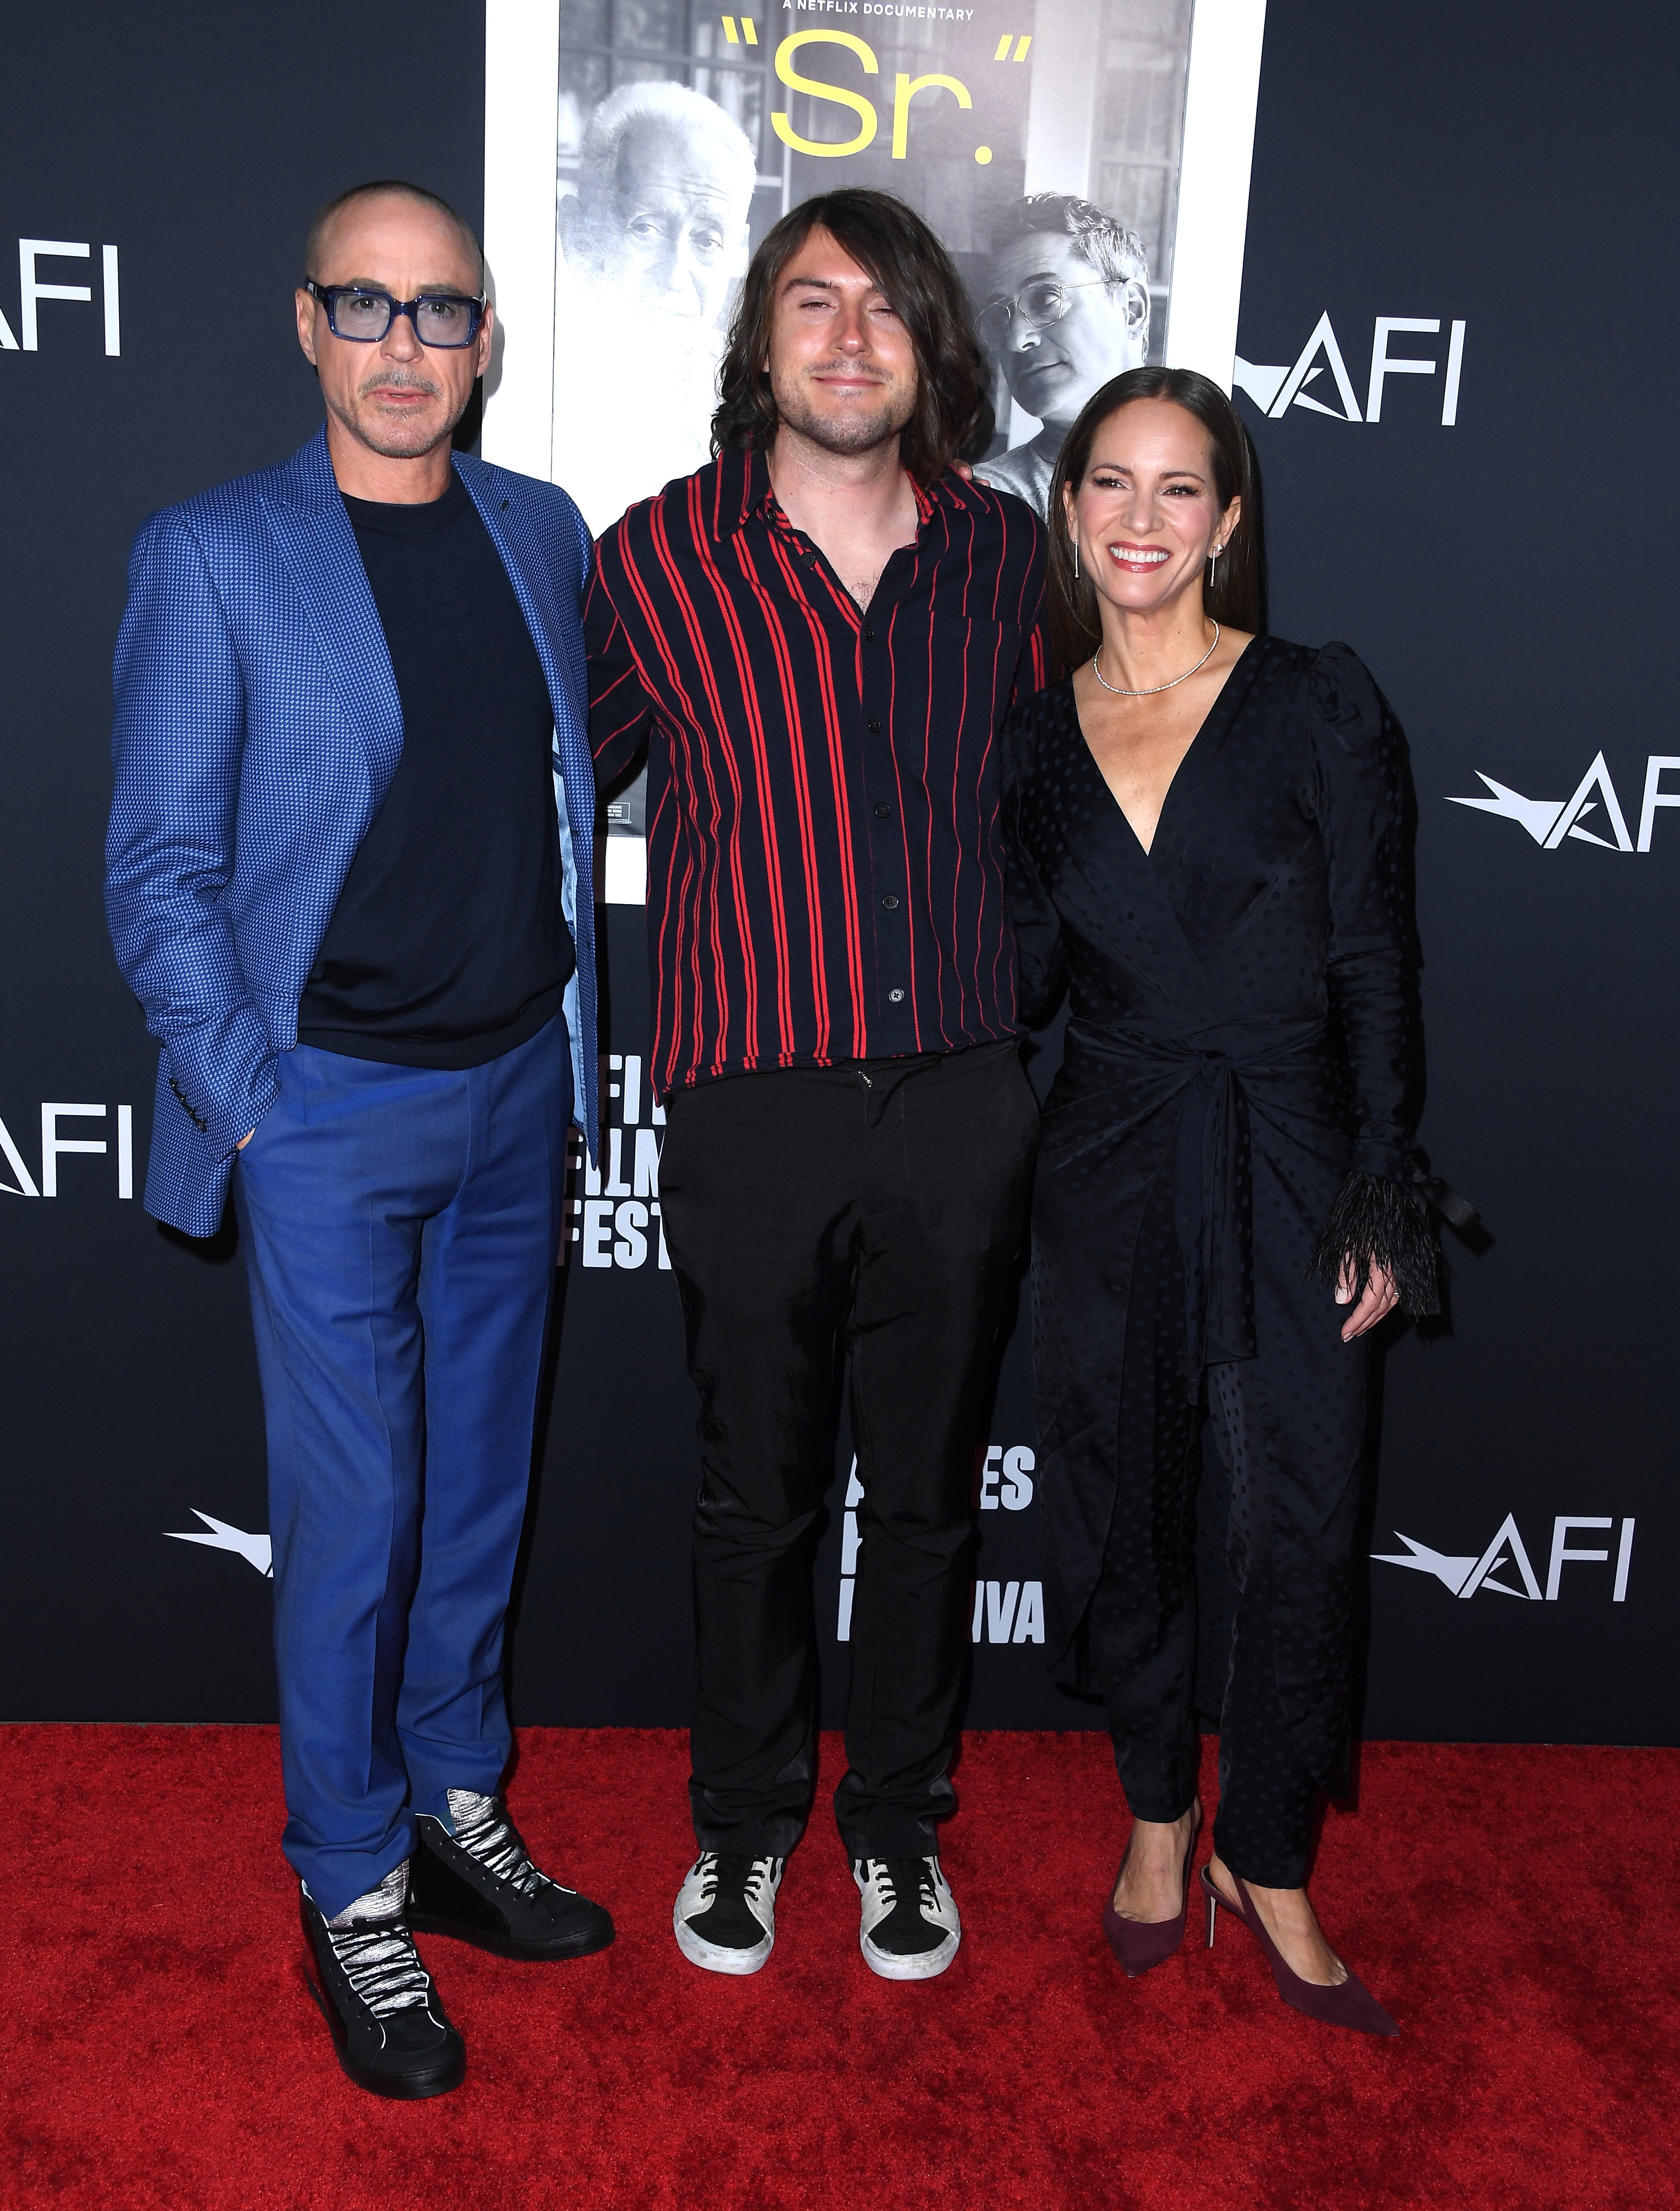 Indio Falconer Downey, Robert Downey Jr. and Susan Downey arrives at the 2022 AFI Fest - "Sr." Special Screening at TCL Chinese Theatre in Hollywood, California on November 04, 2022 | Source: Getty Images